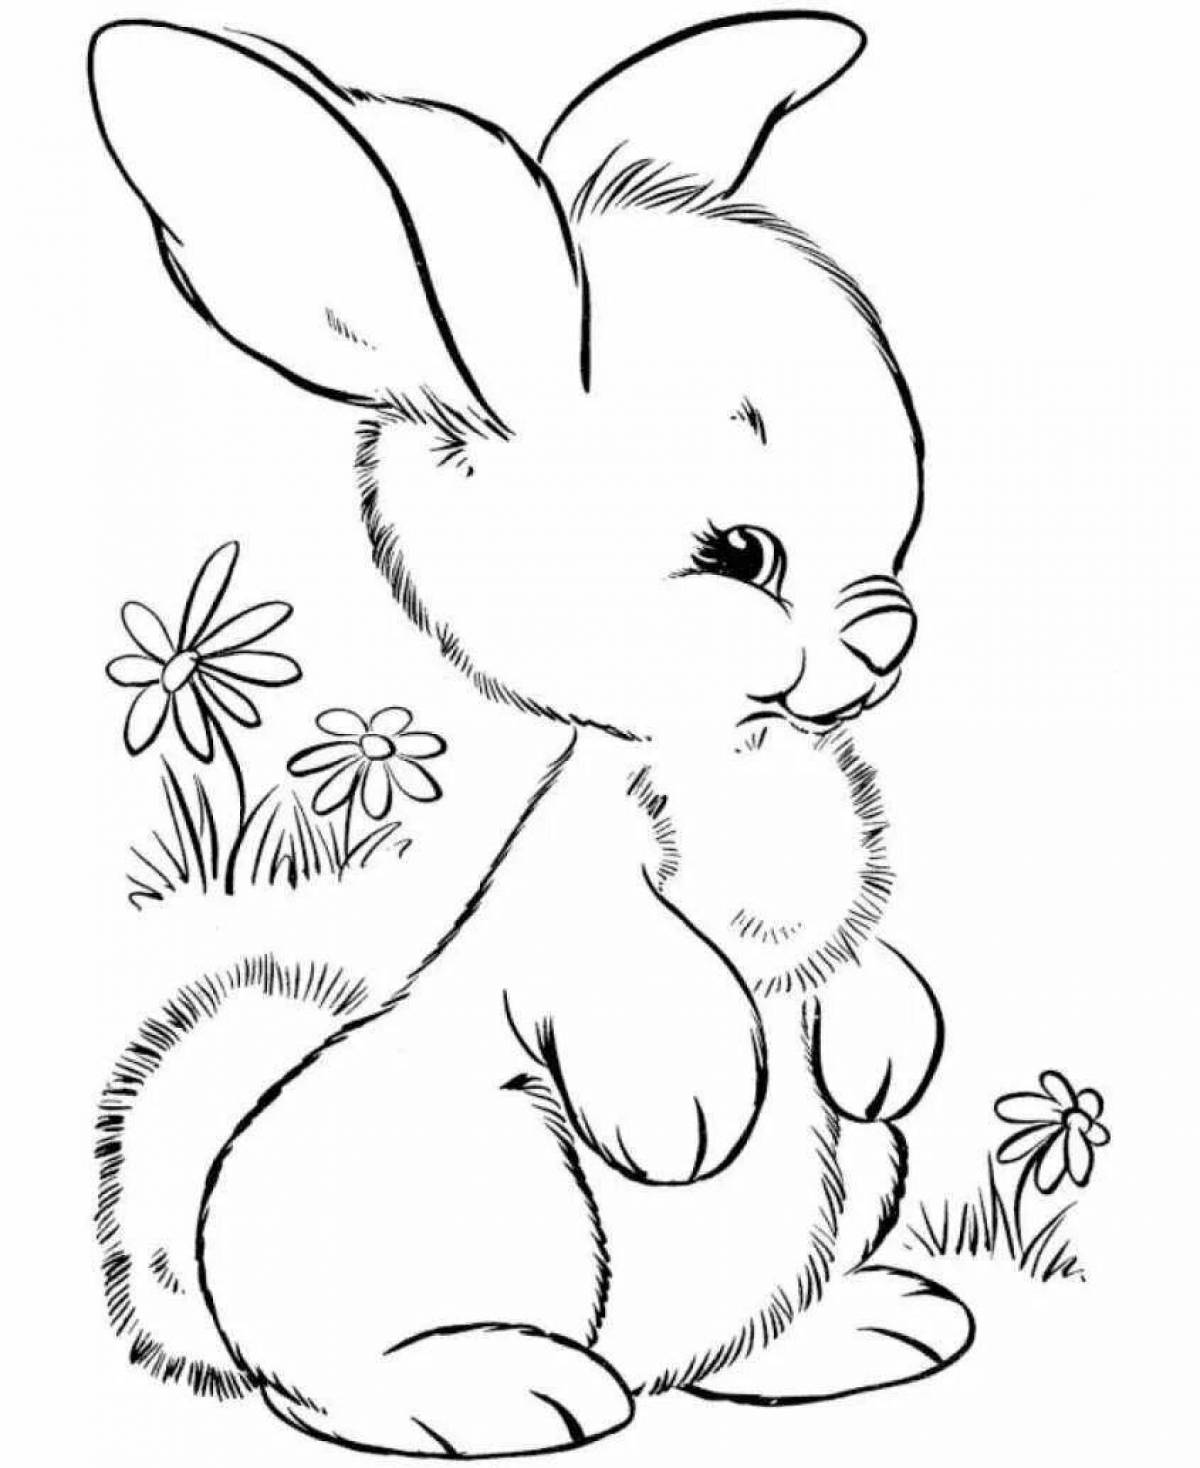 Funny rabbit coloring book for kids